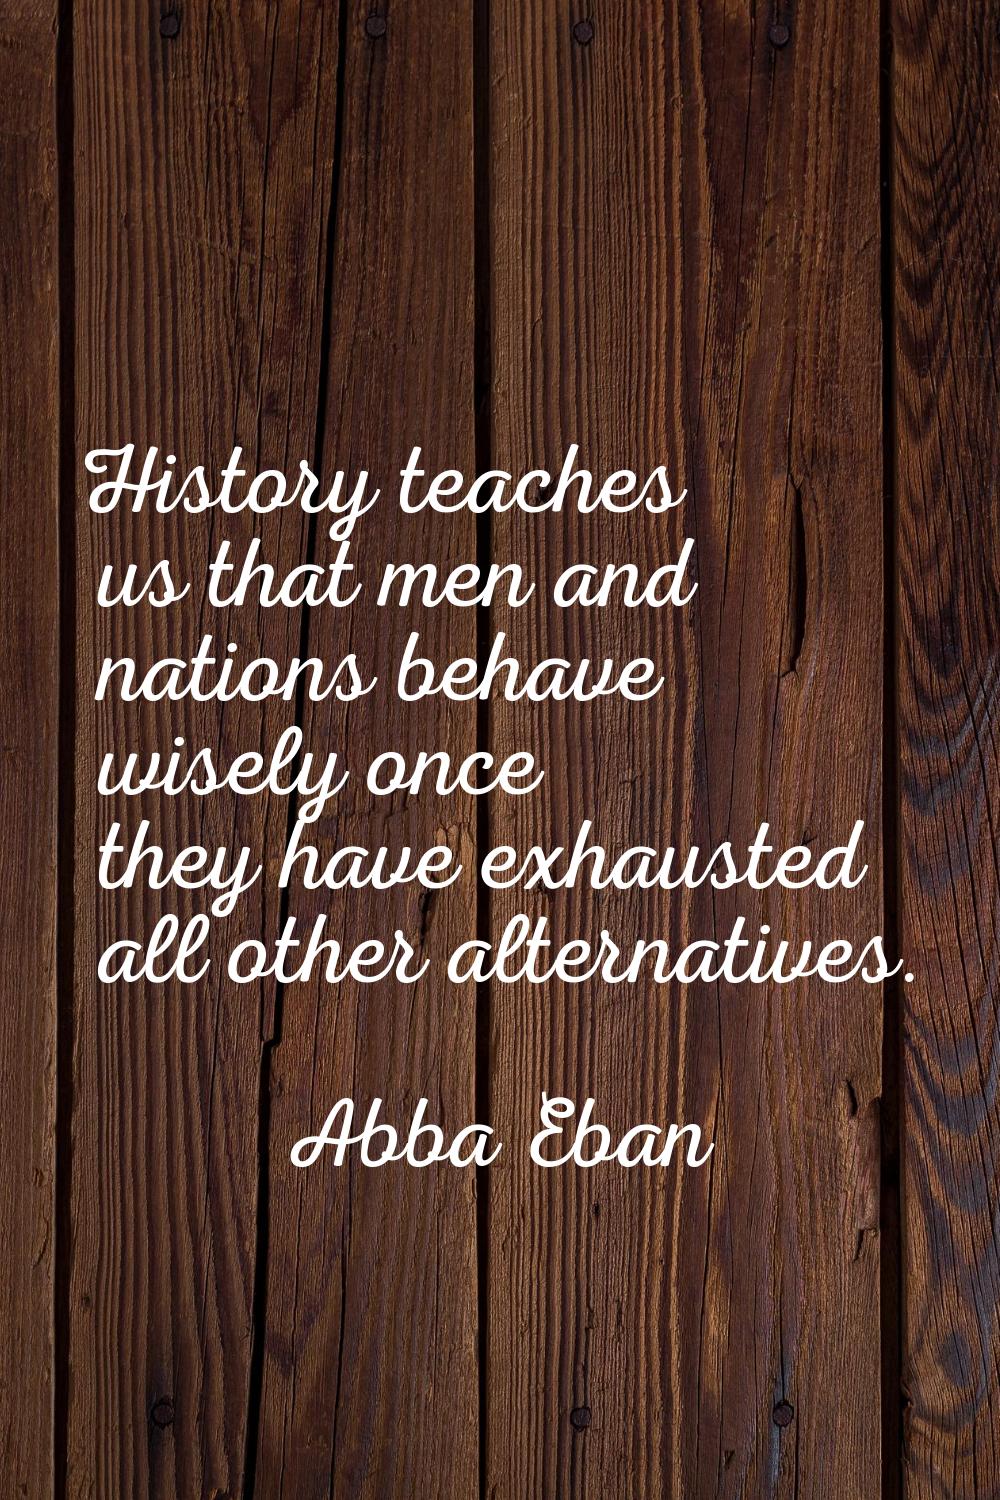 History teaches us that men and nations behave wisely once they have exhausted all other alternativ